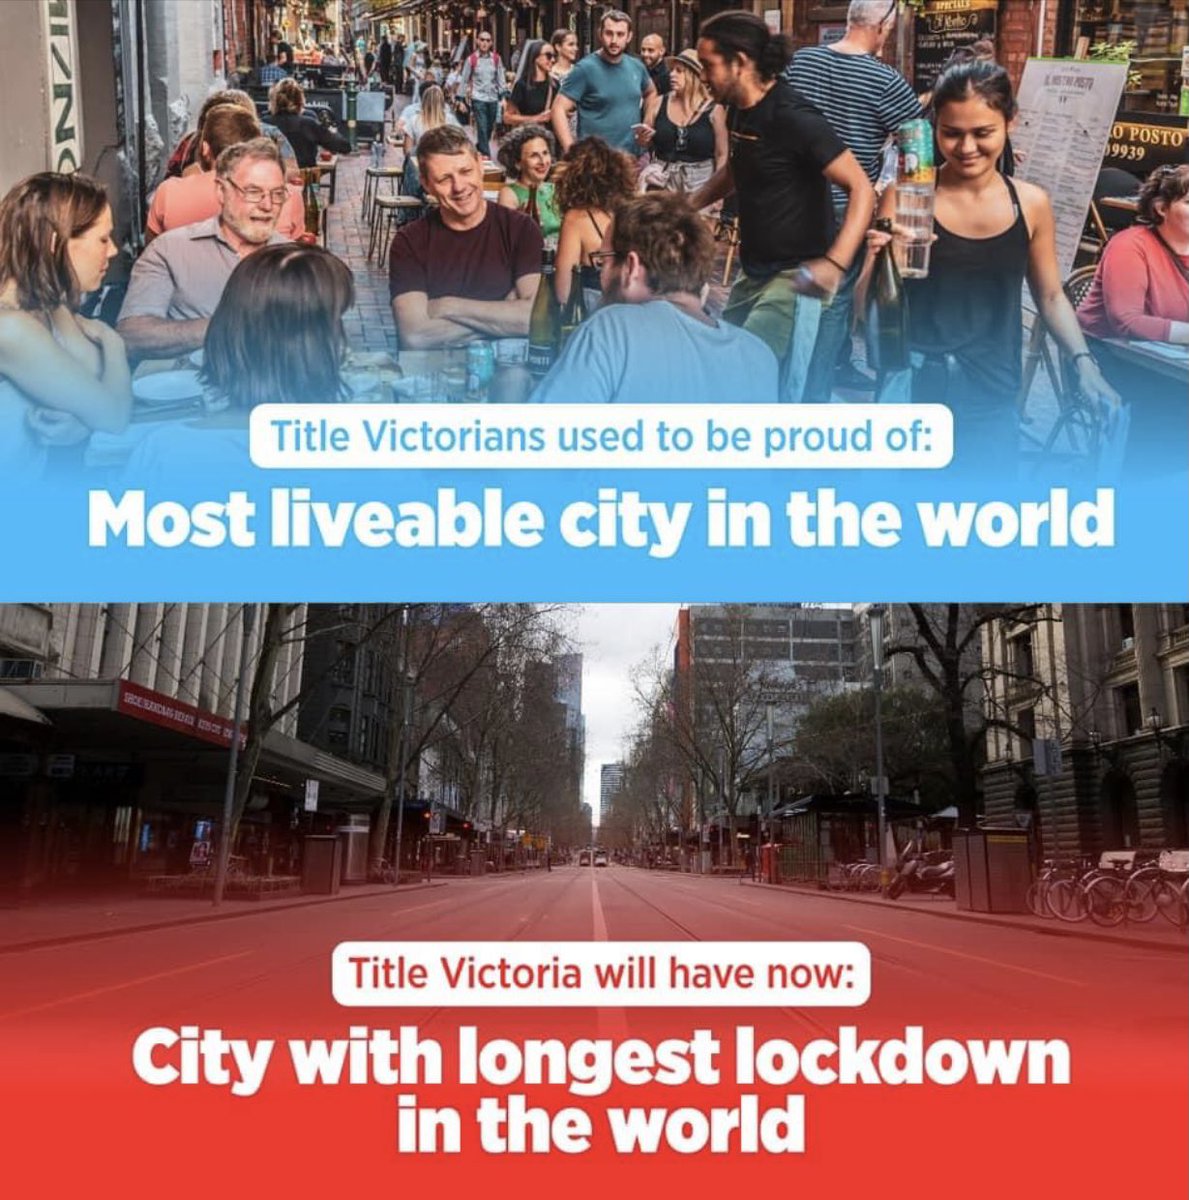 Many reasons why #DanNext 

👉shameful World Record for longest lockdown in the world
👉threatening people’s jobs & livelihoods
👉Mandates = Coercion
👉#VicPoliceViolence
👉Police State

#DanNext to GO - so say all of us !!